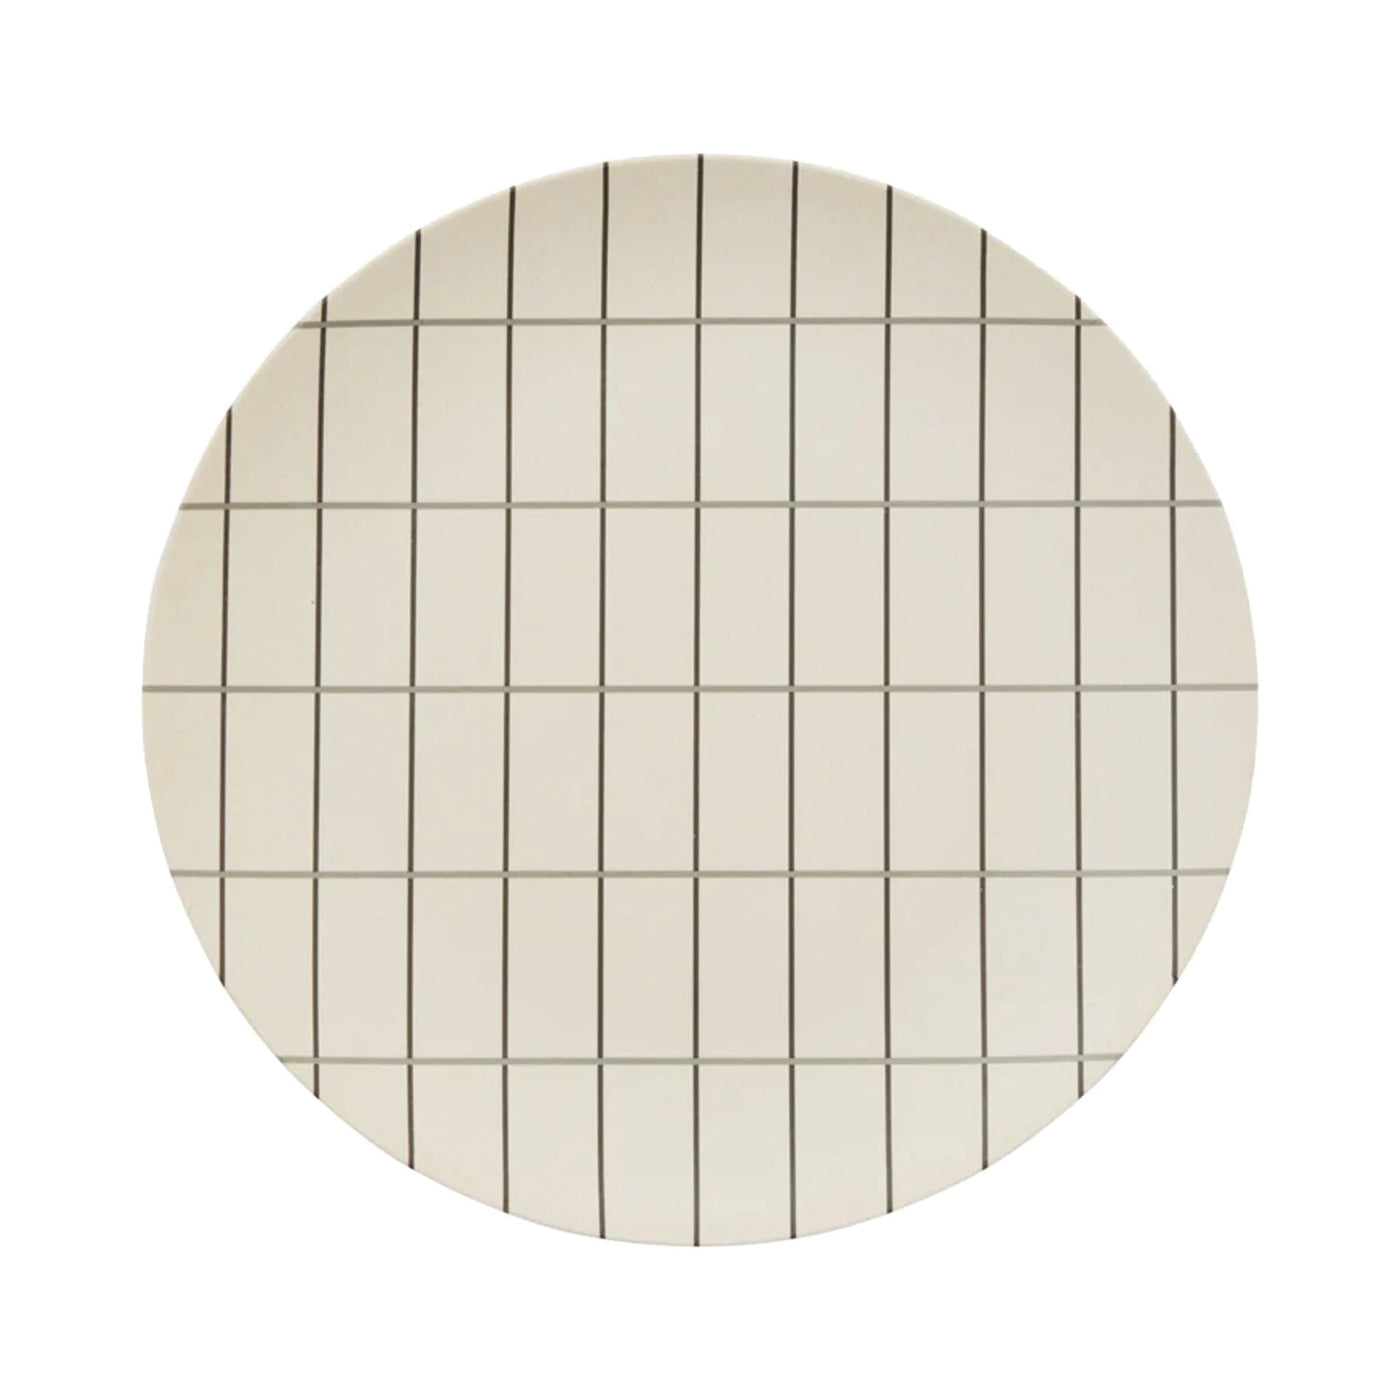 Bamboo grid tray in large with a white background